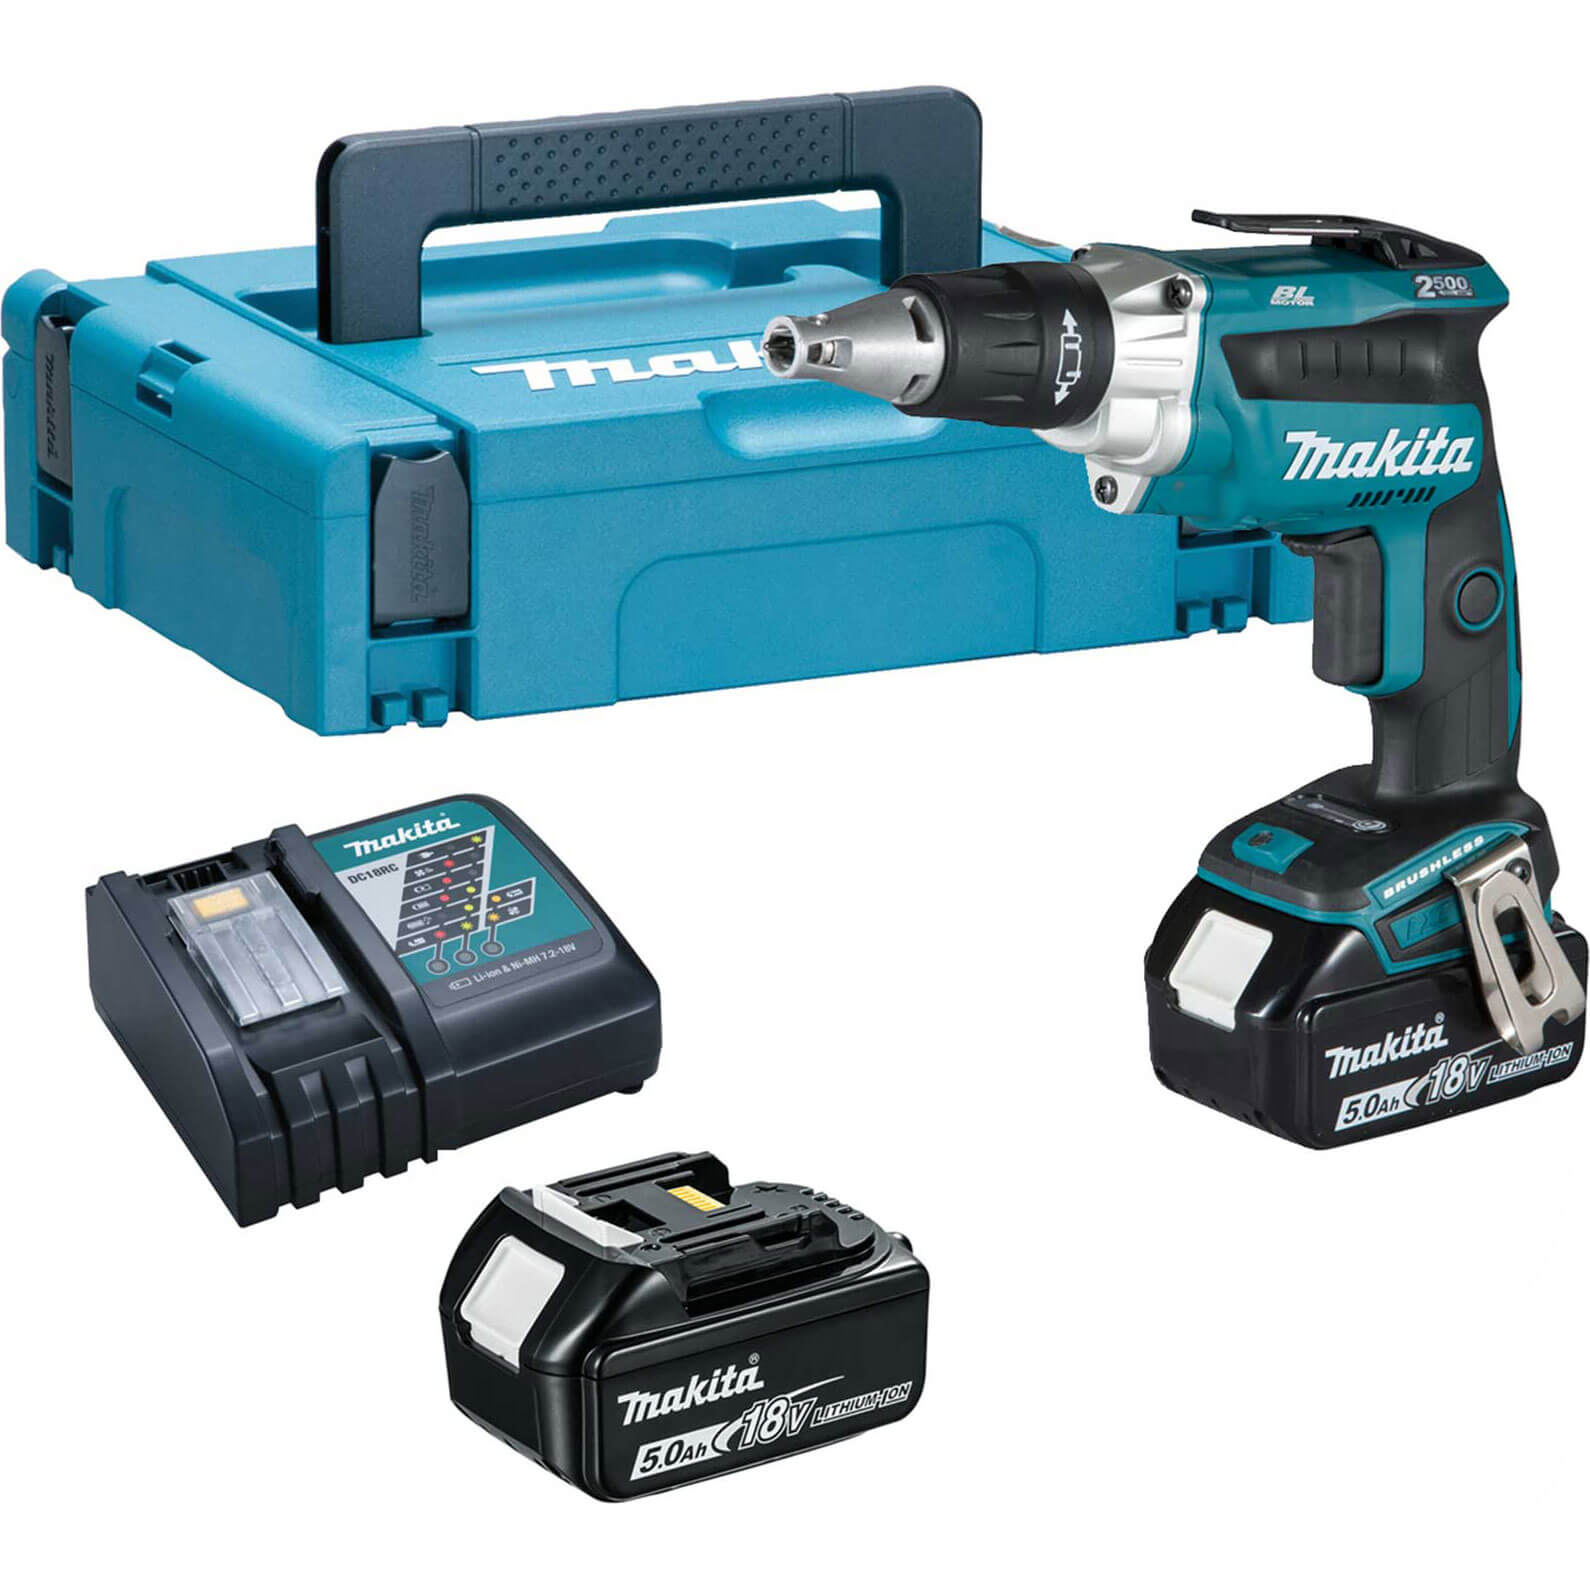 Image of Makita DFS250 18v LXT Cordless Brushless Drywall Screwdriver 2 x 5ah Li-ion Charger Case